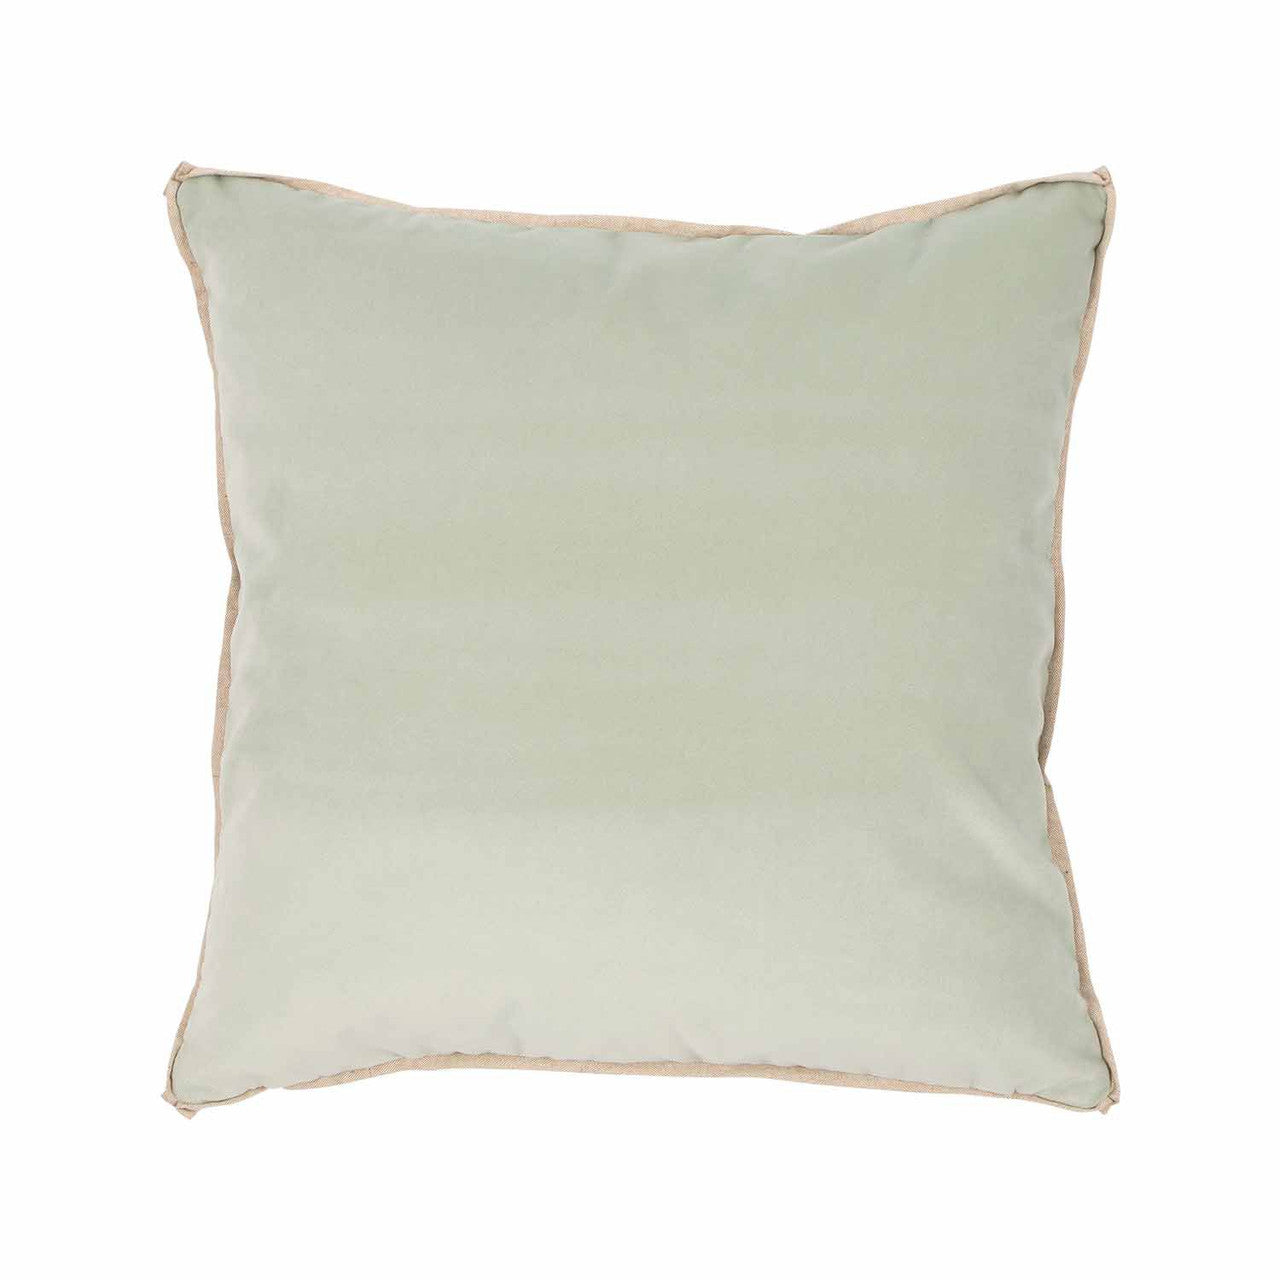 Banks Pillow in Mint